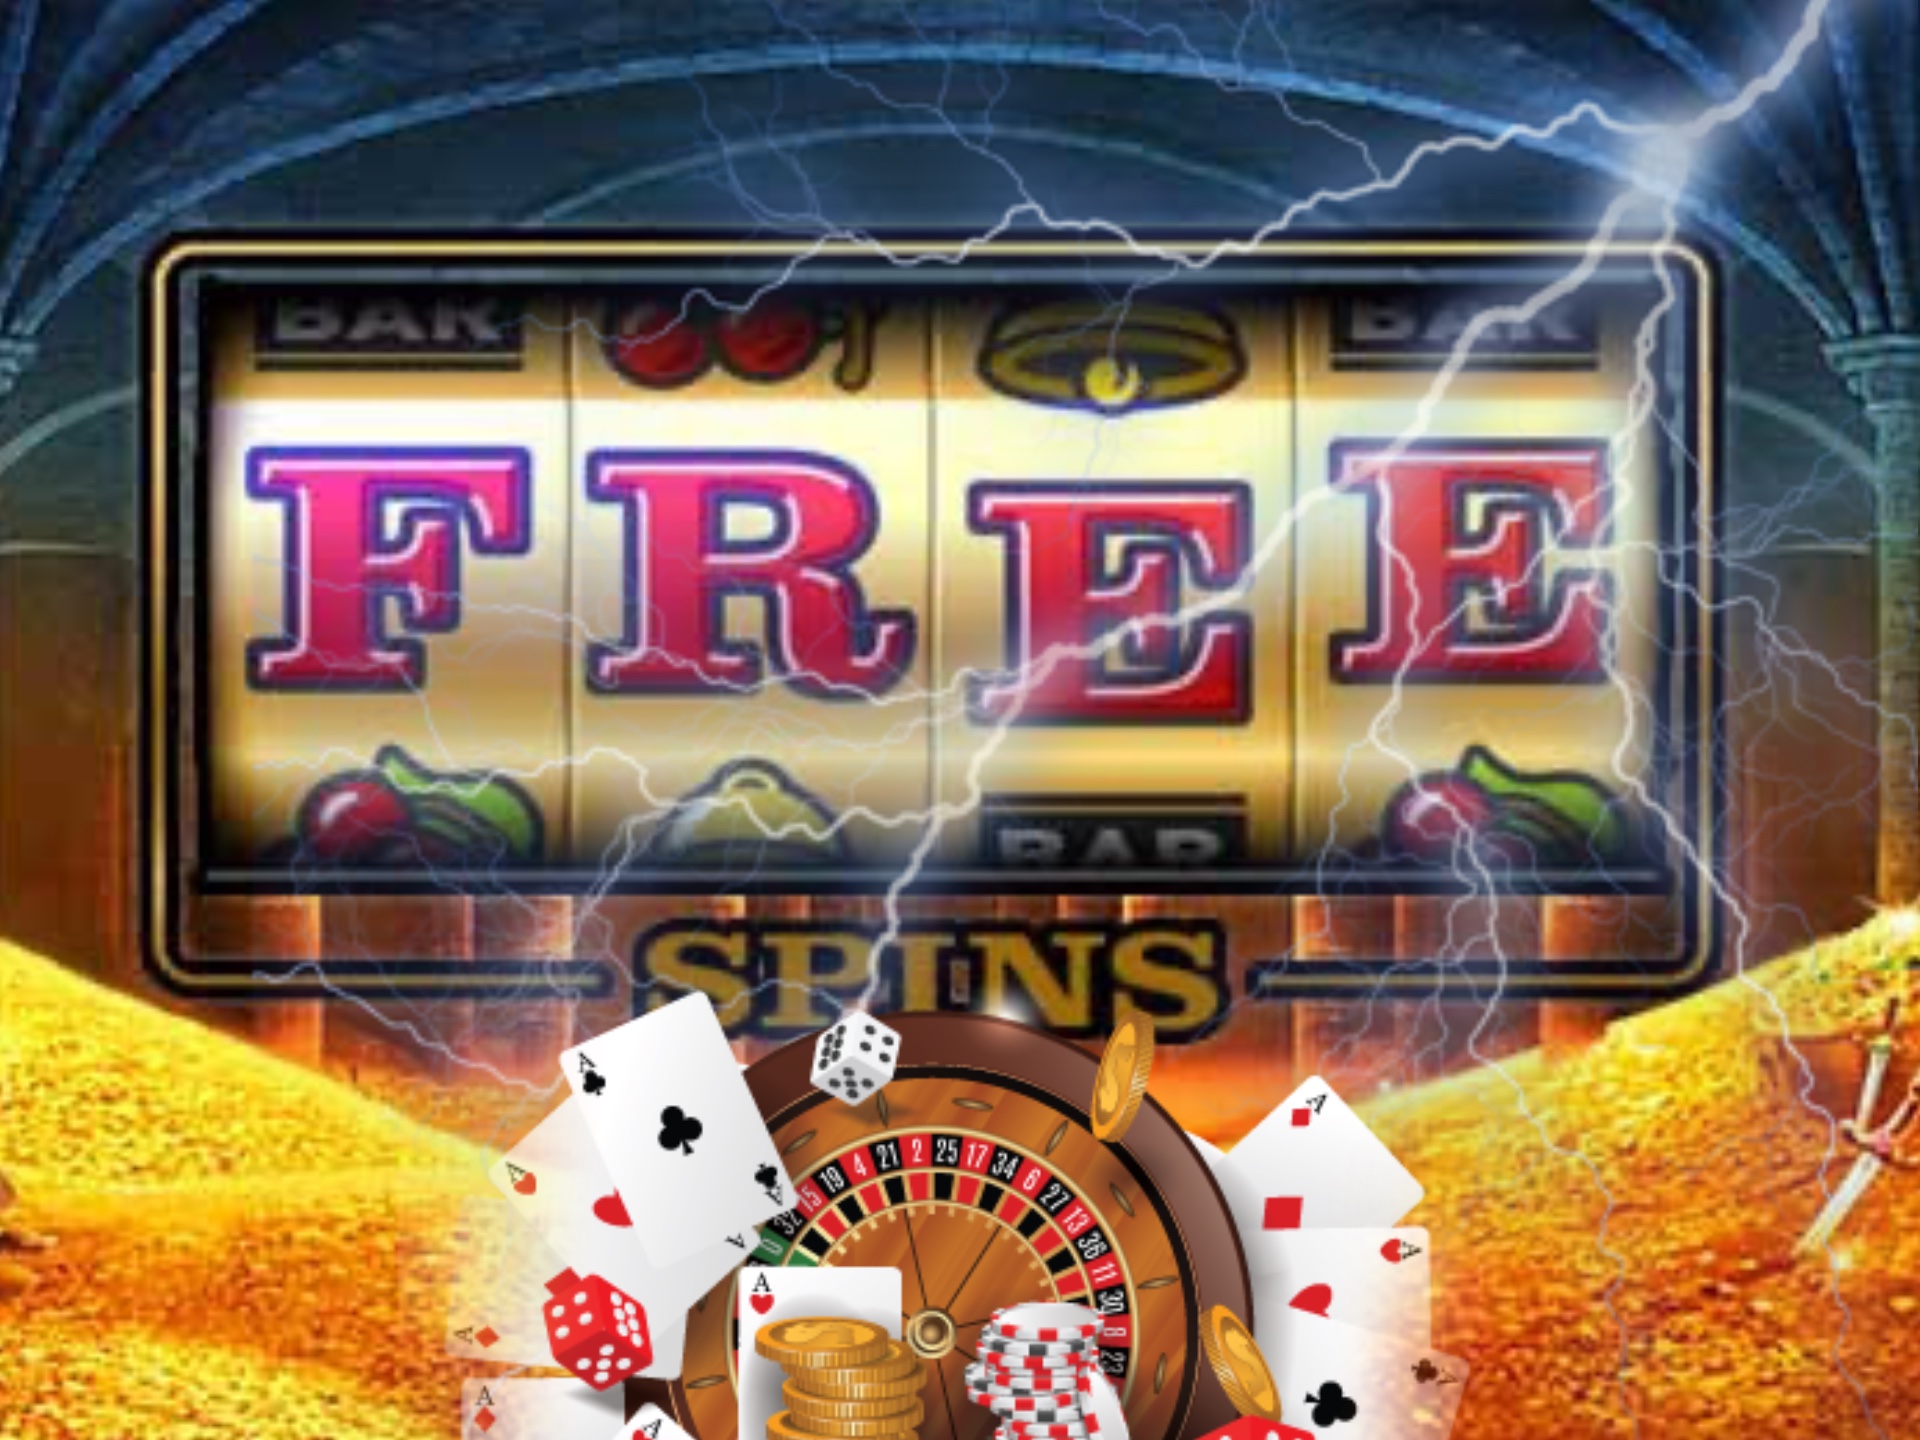 Free spins is a great way to get to know a new casino.